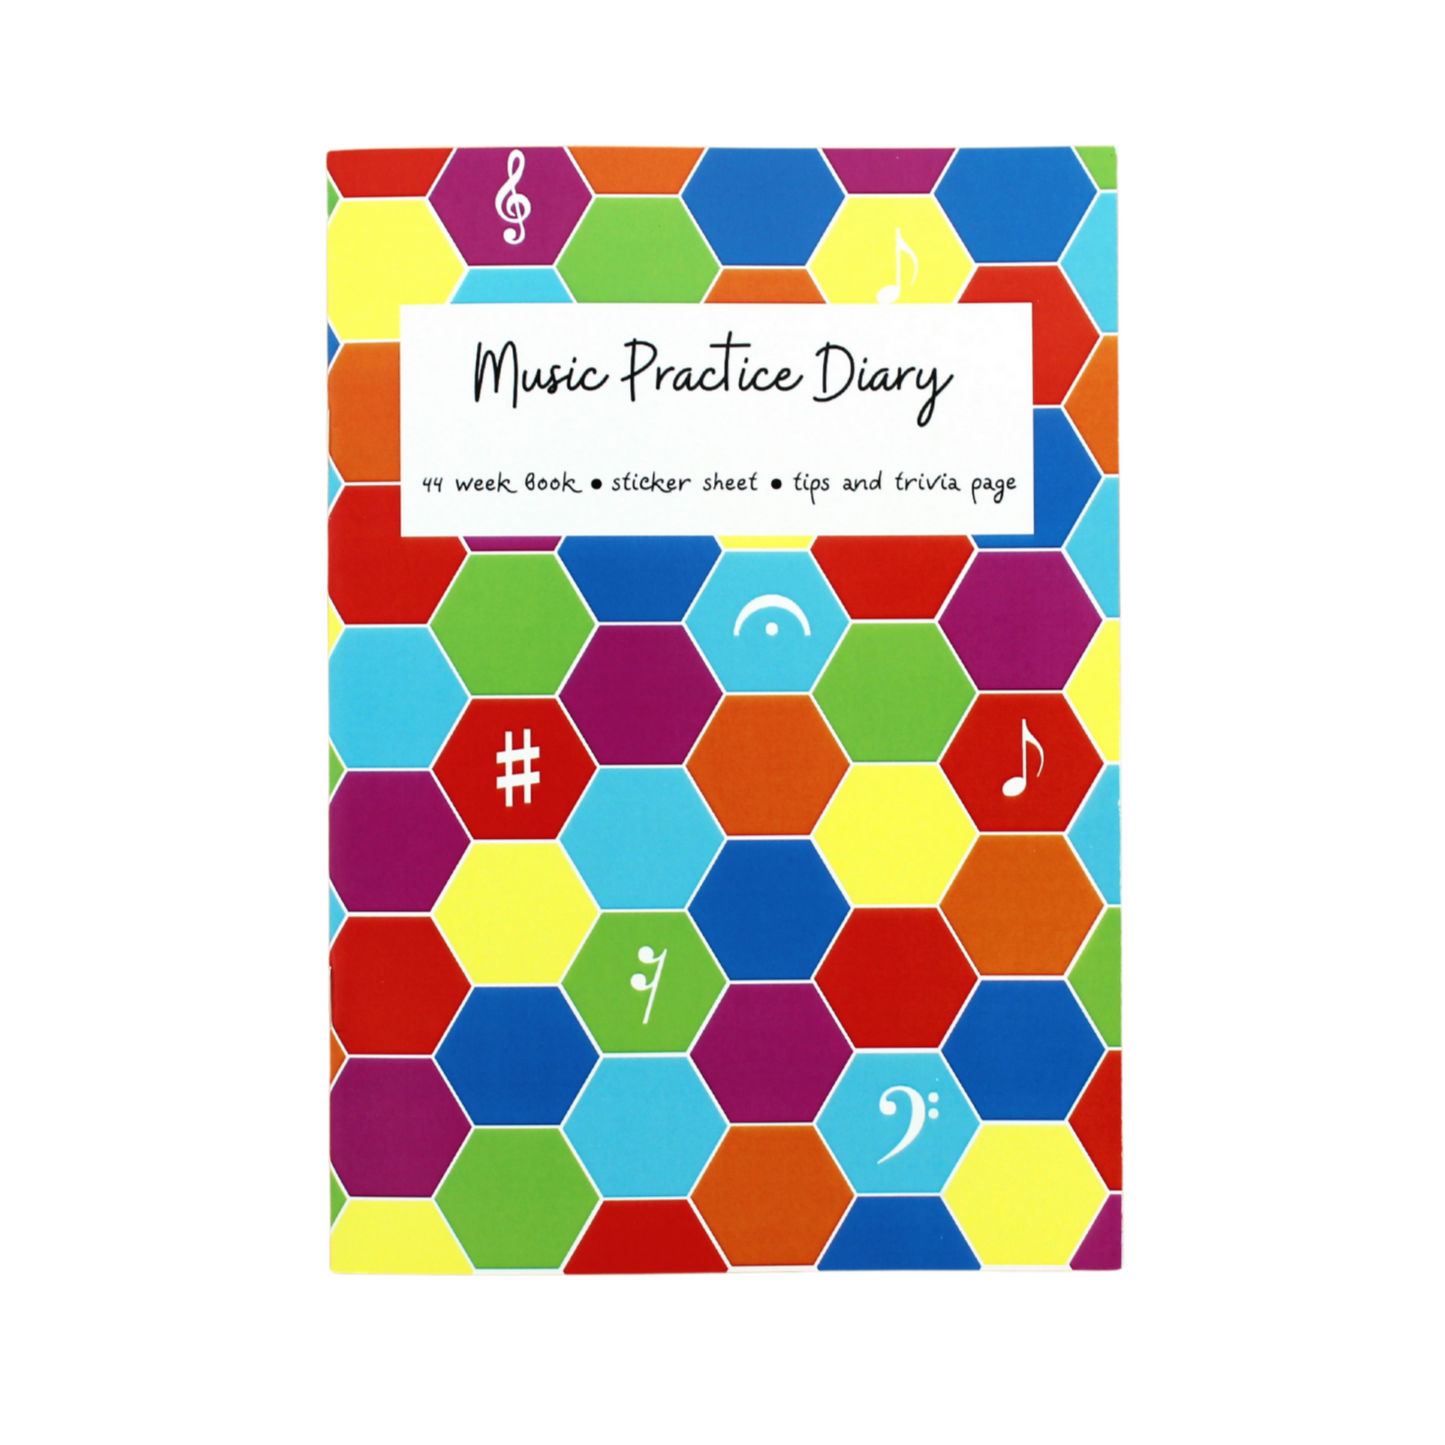 Music practice diary with a colourful cover, featuring a multicoloured hexagonal design with musical symbols.